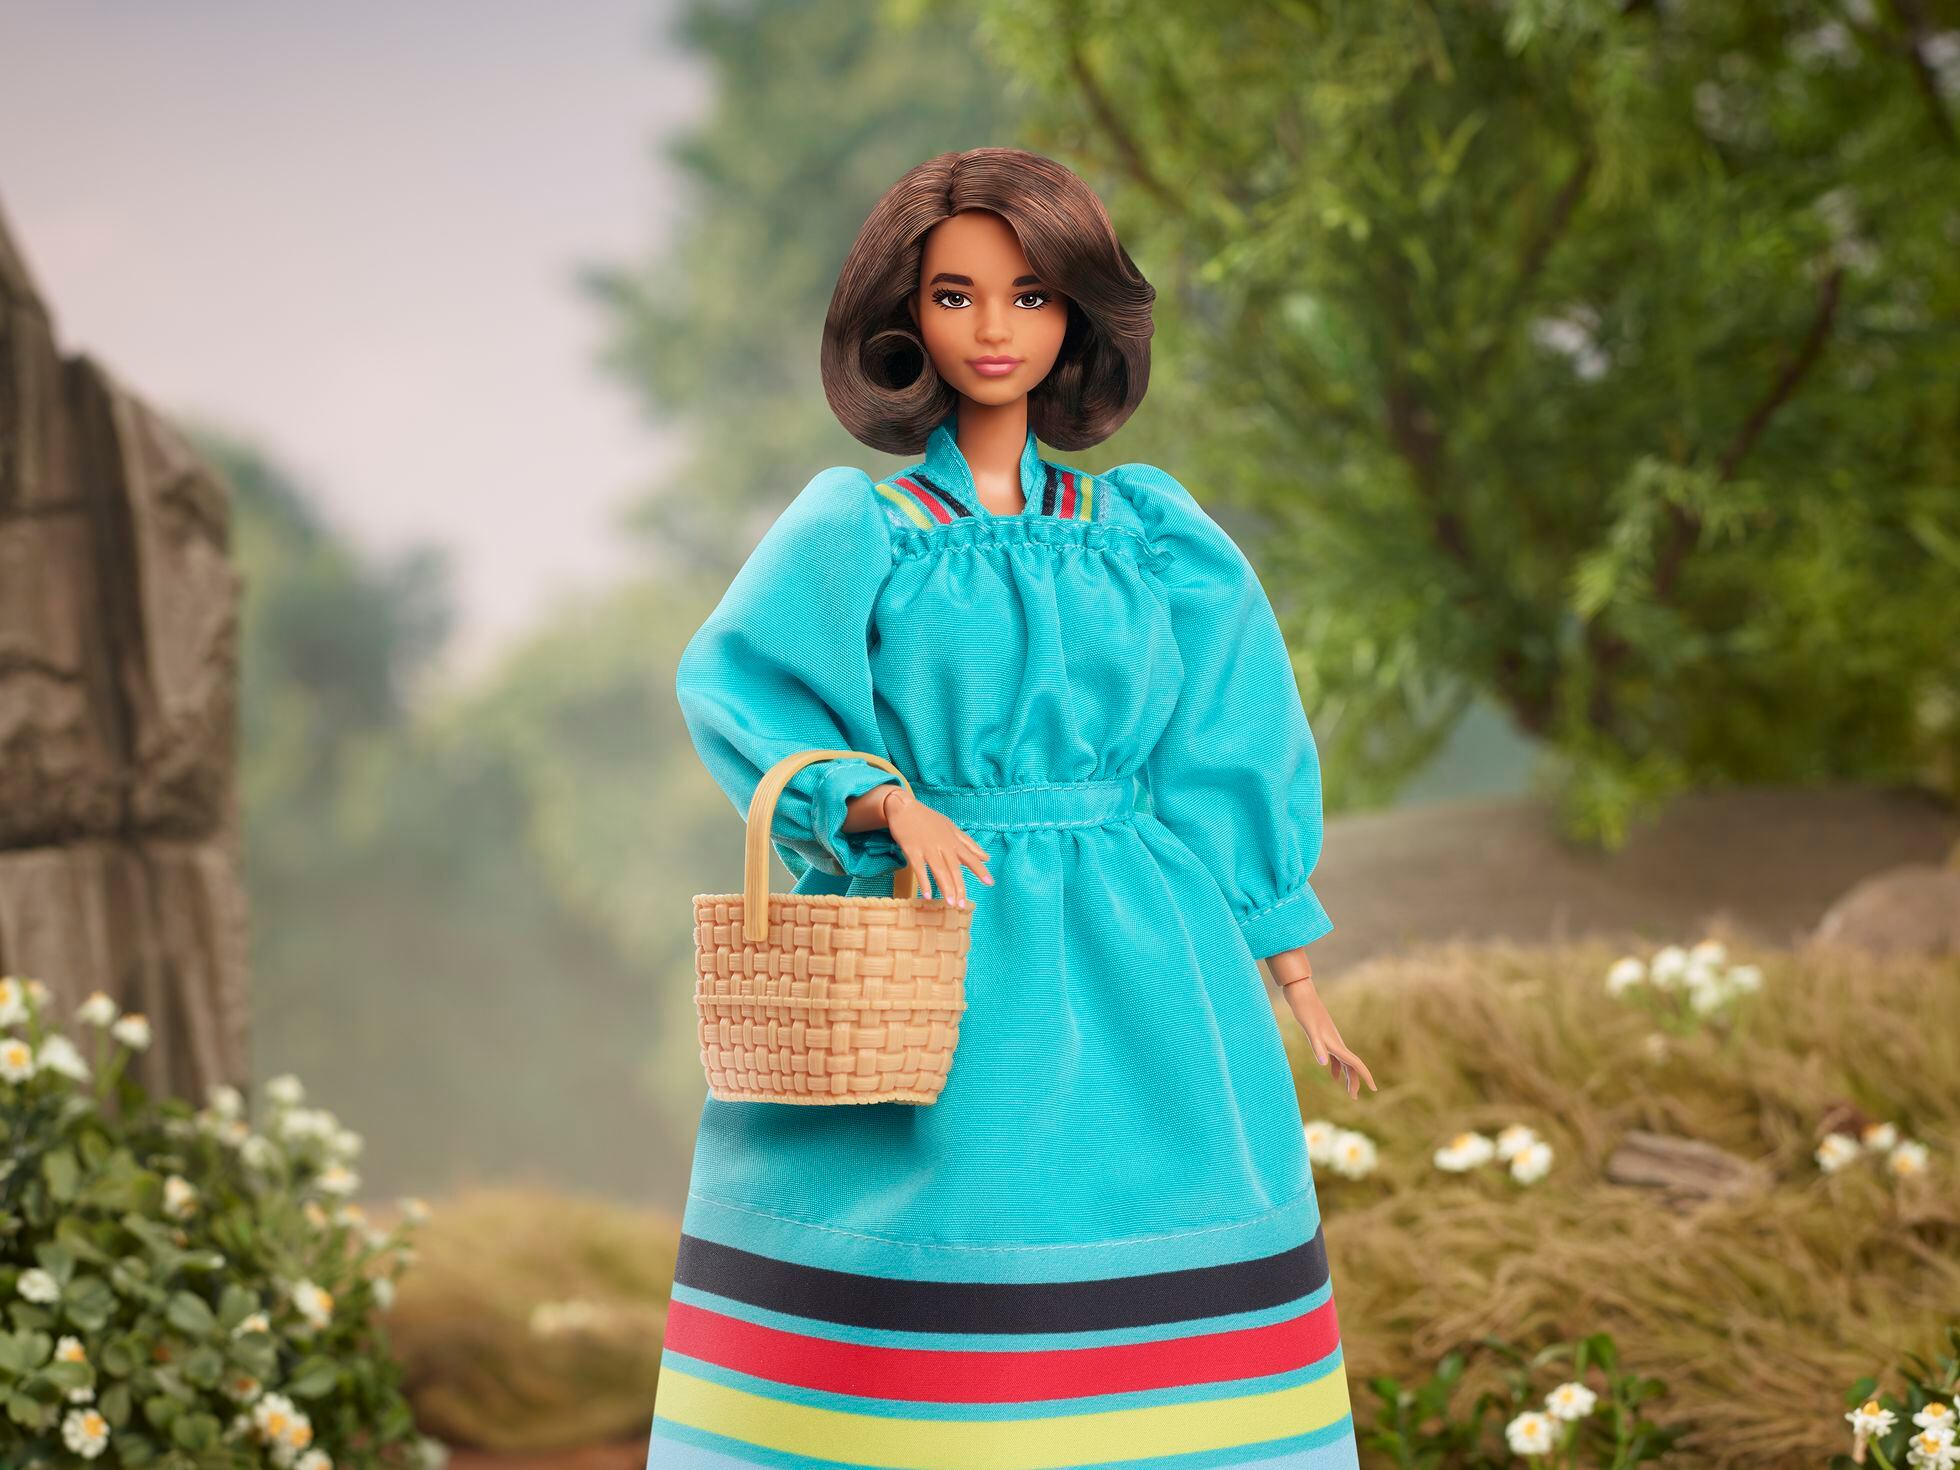 Mattel's Aims To Right Its Wrongs With Black Barbie Dolls Centered